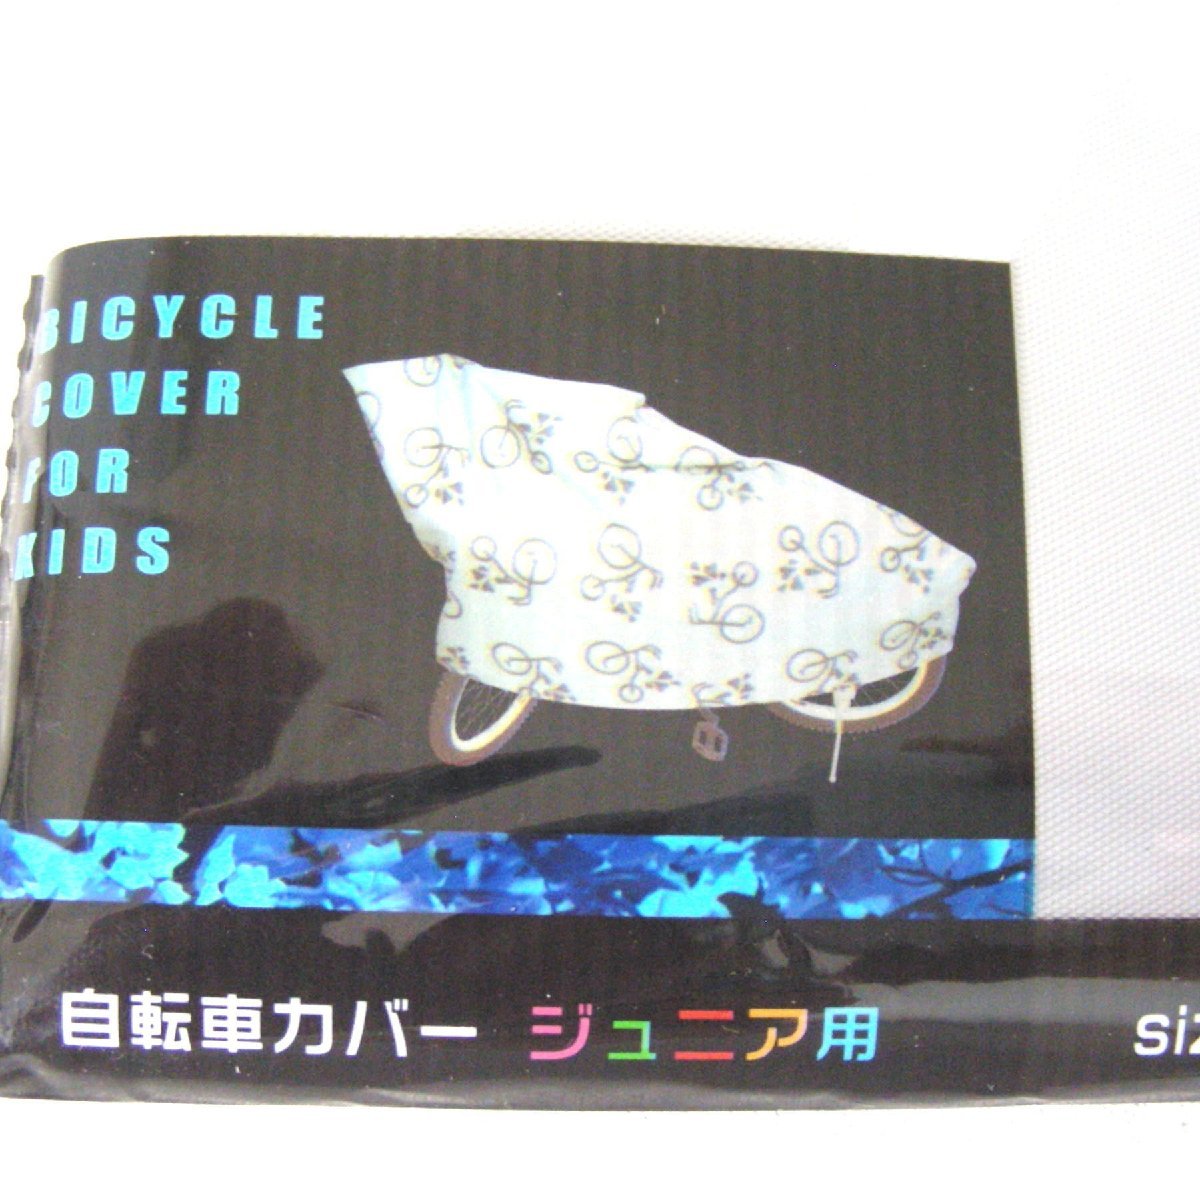 * unopened * unused * bicycle cover Junior for size 130×80cm(14~16 -inch )* child & baby * miscellaneous goods *W452